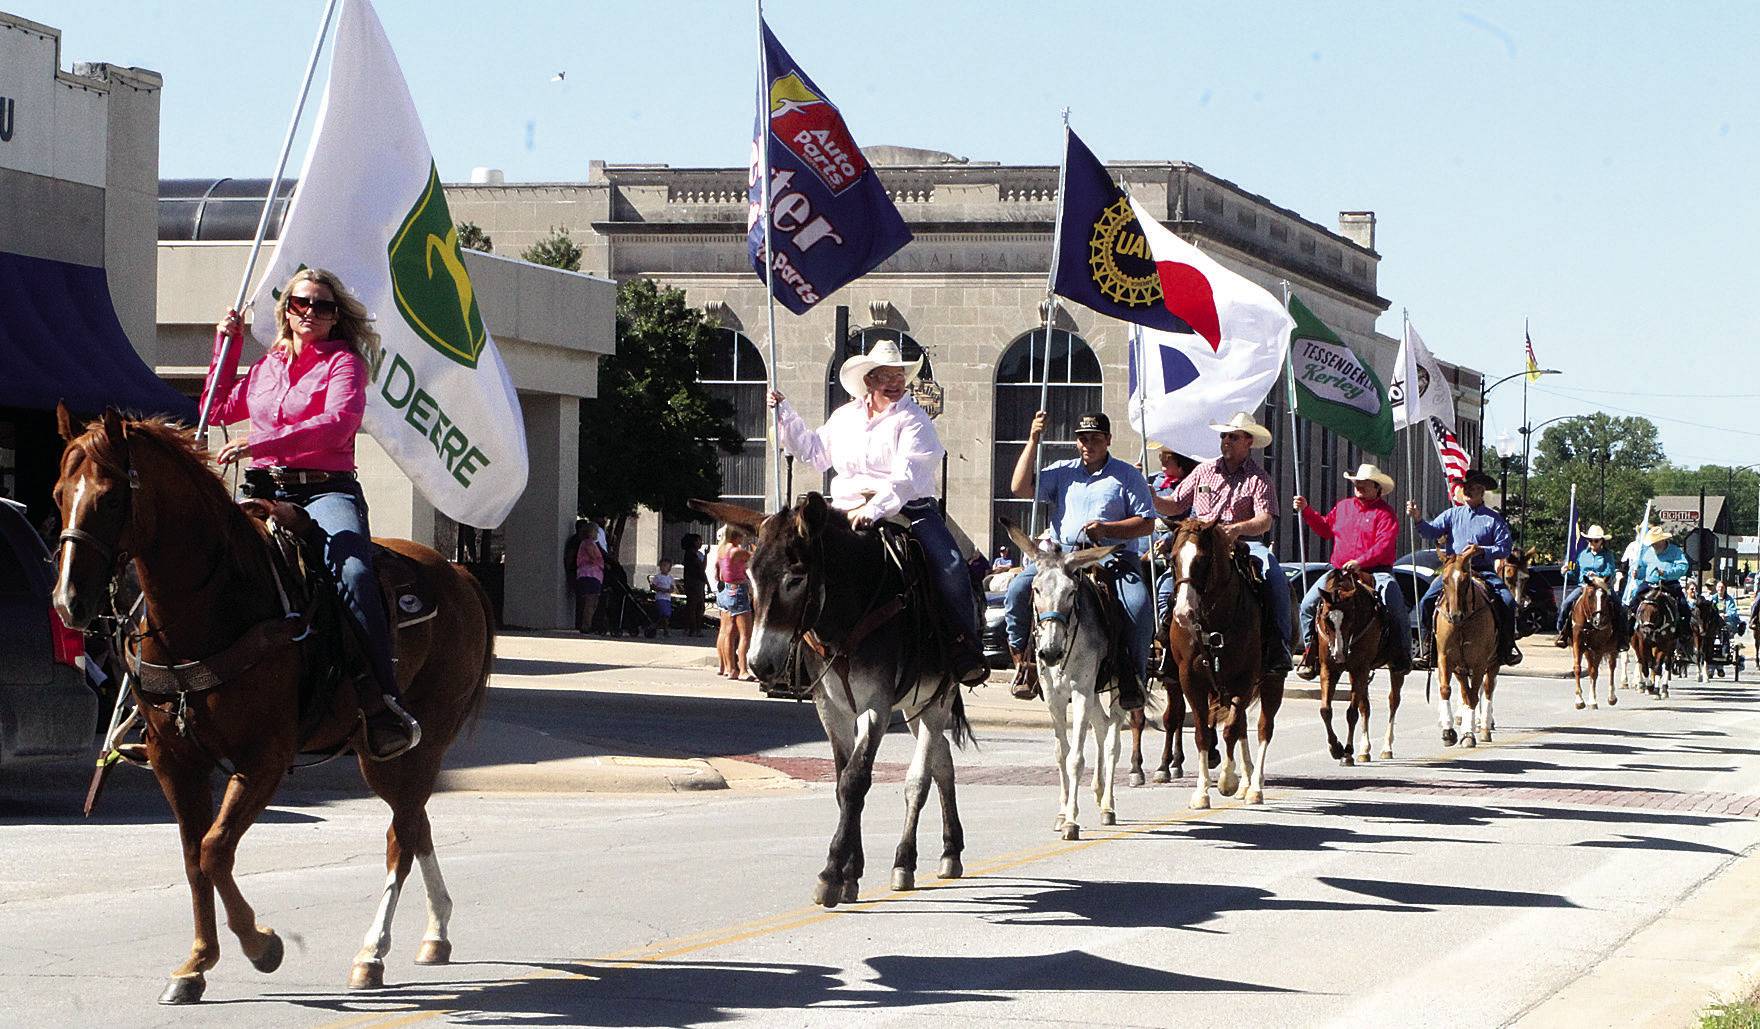 InterState Fair and Rodeo Parade marches through downtown plaza The